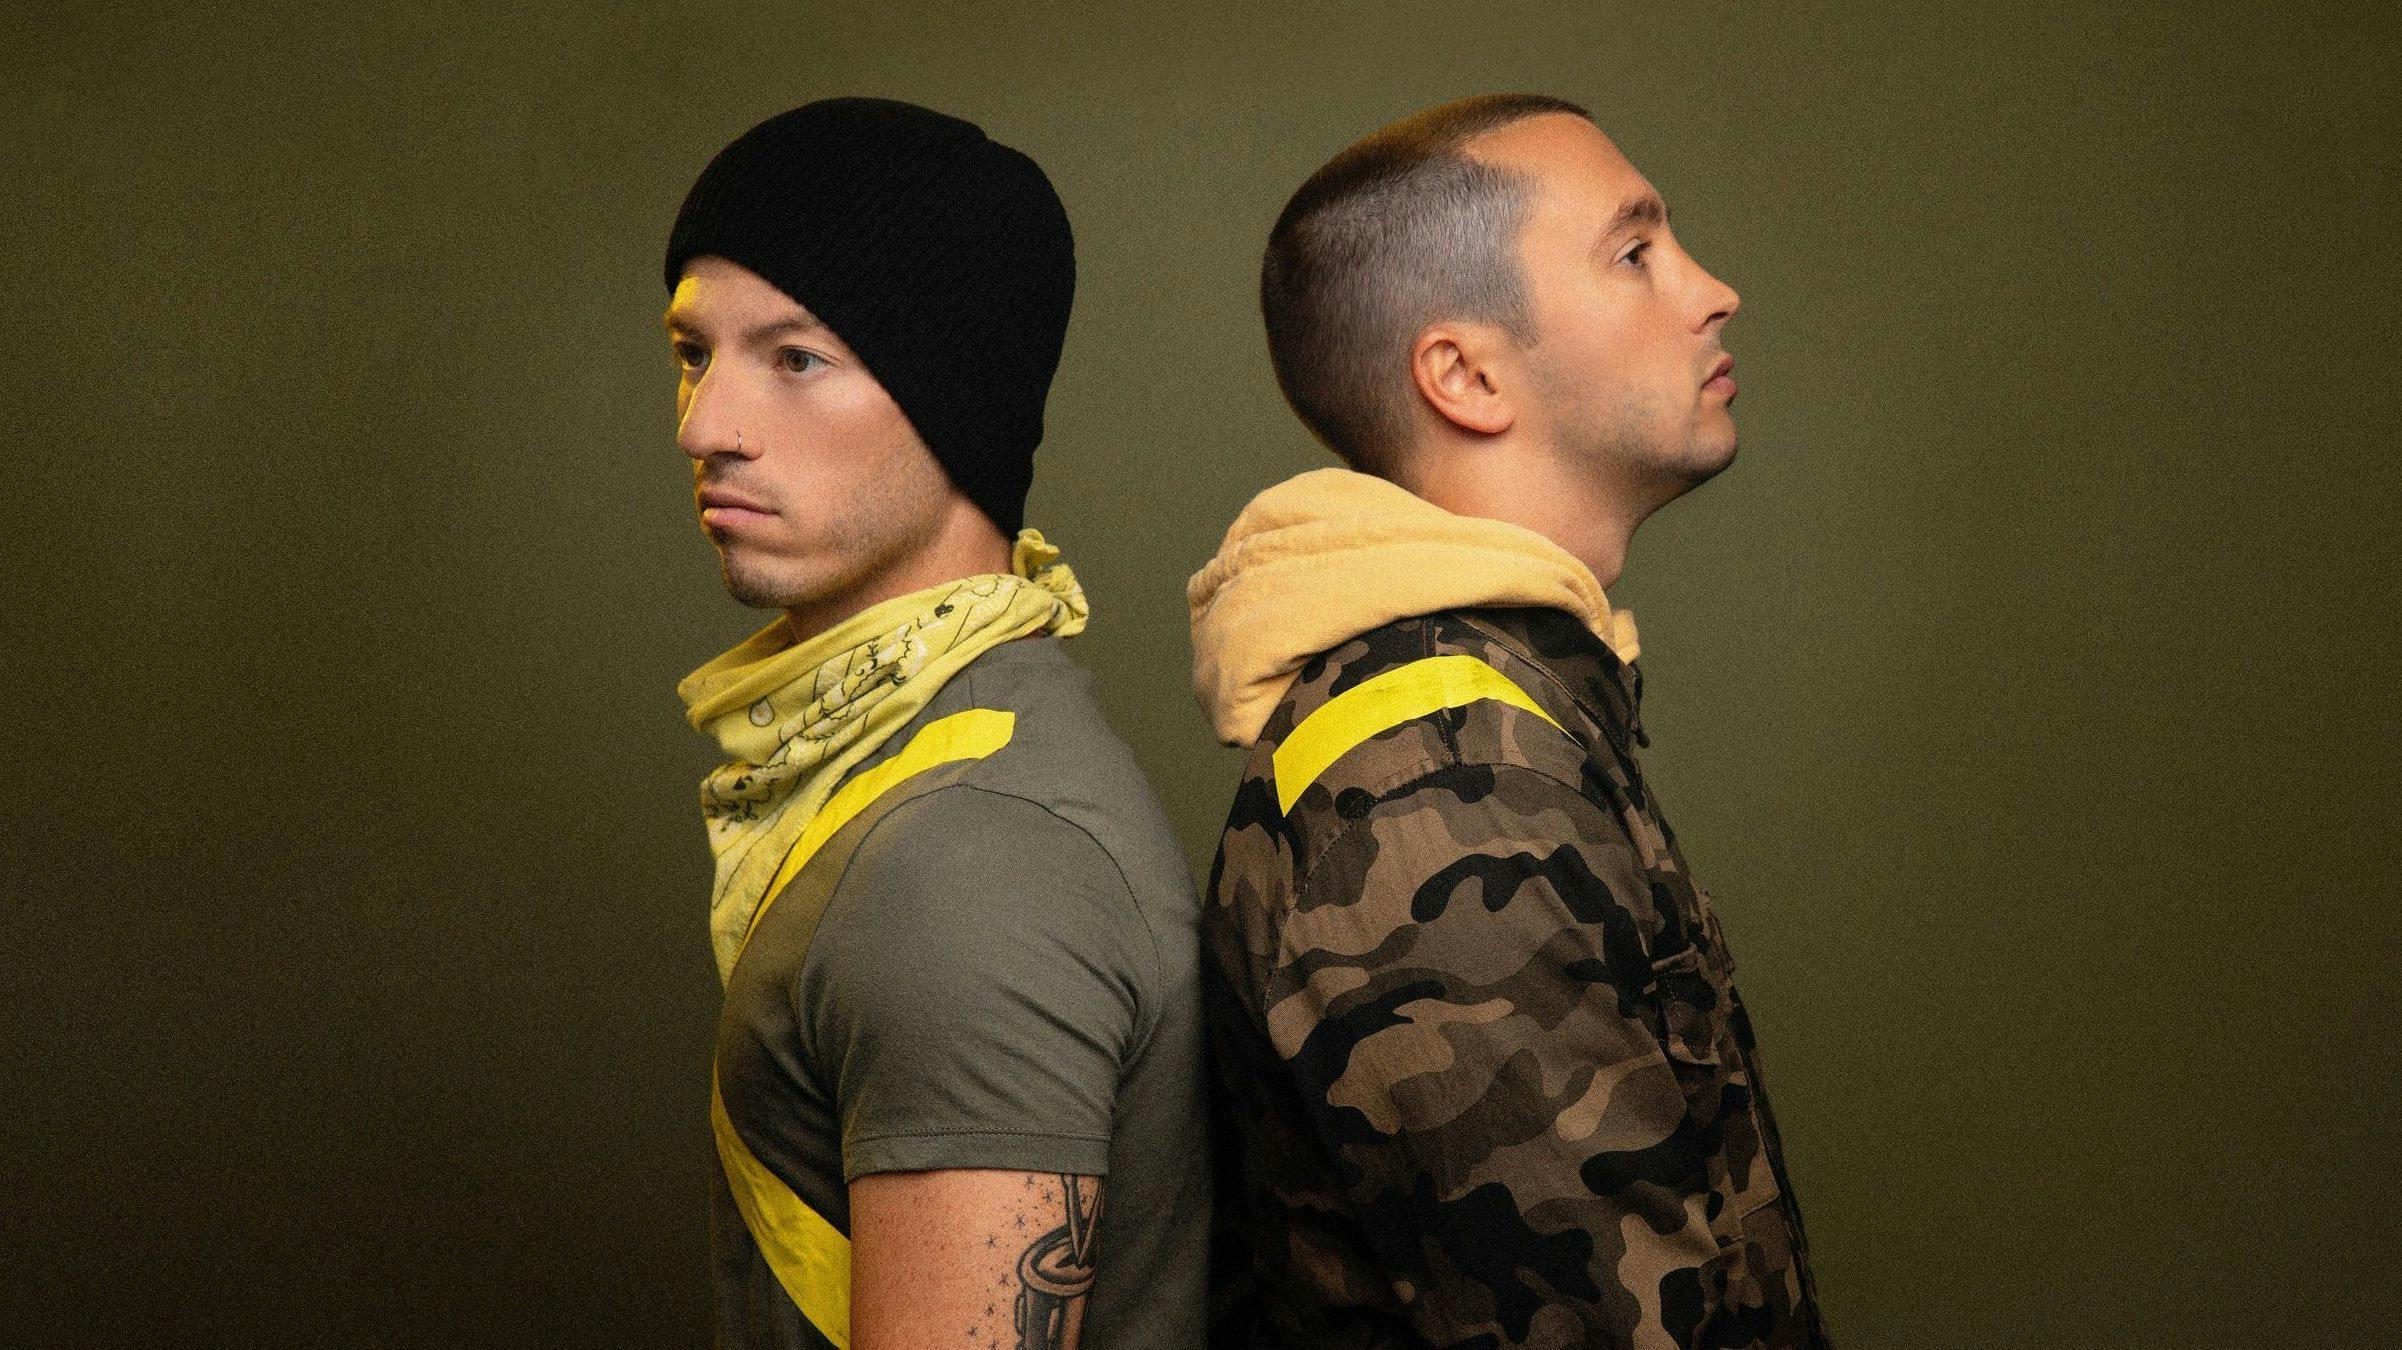 twenty one pilots' Josh Dun On Their New Album And Time Away From The Spotlight